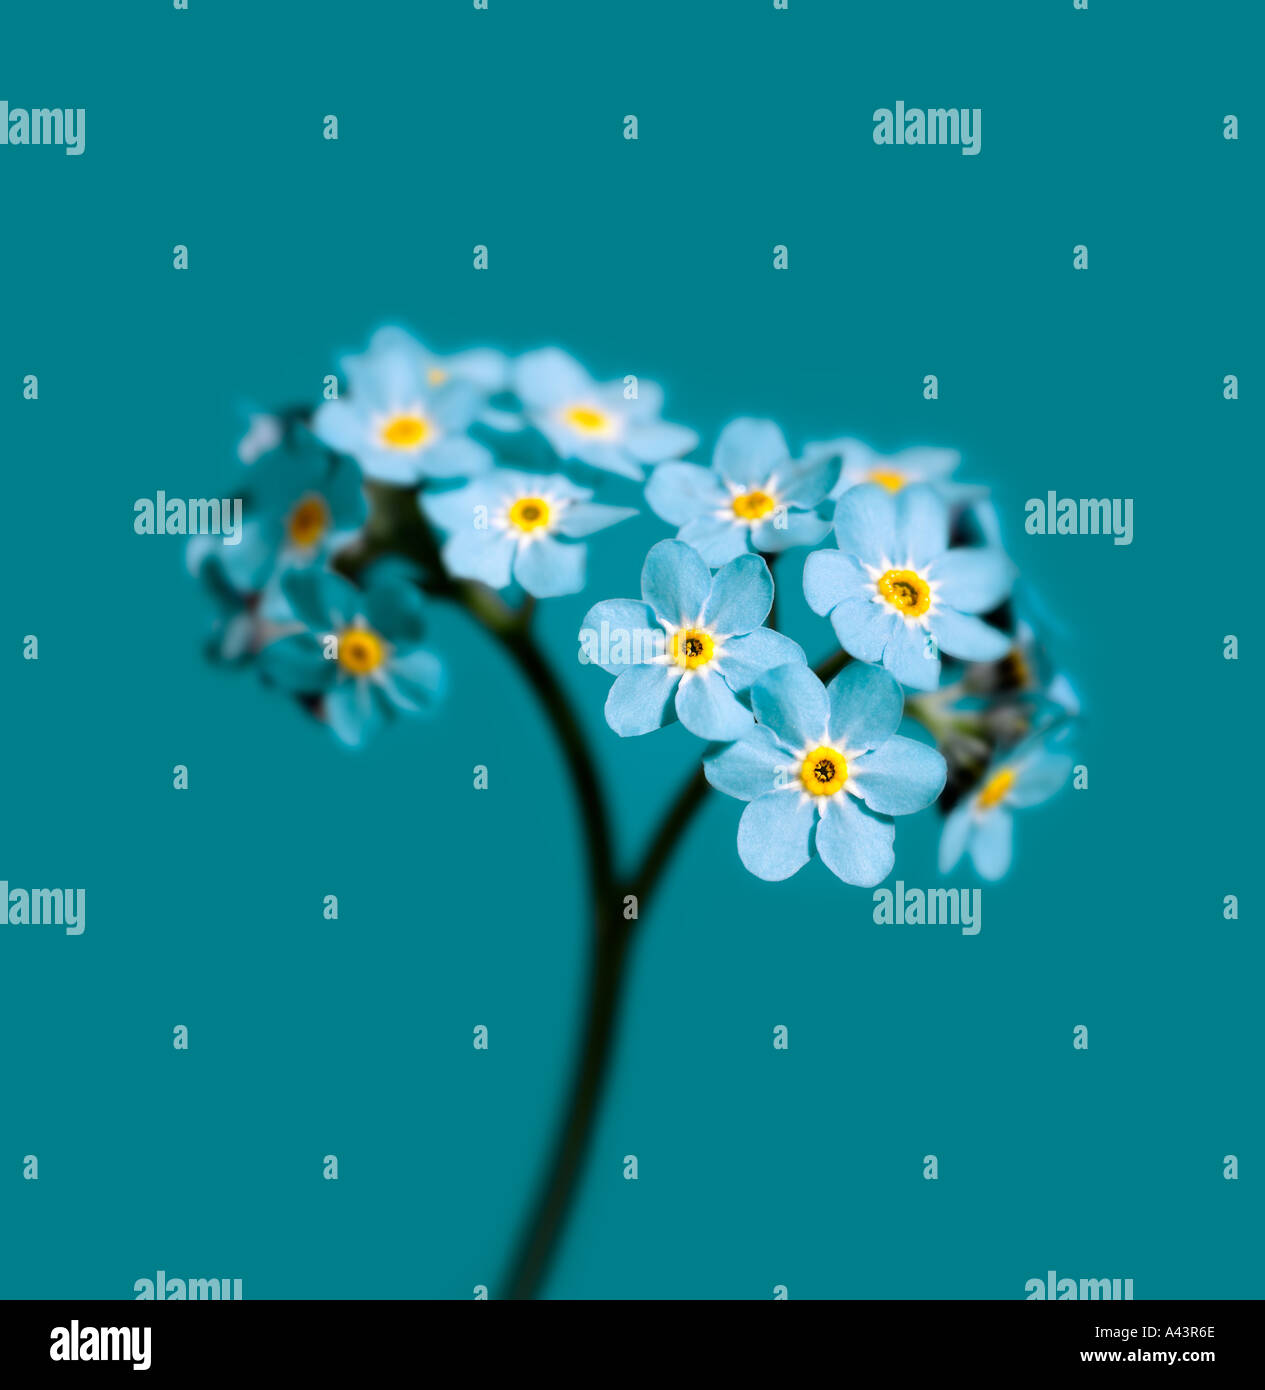 Forget me not Myosotis arvensis flowers photographed on a turquoise background This common plant which flowers in spring is fo Stock Photo